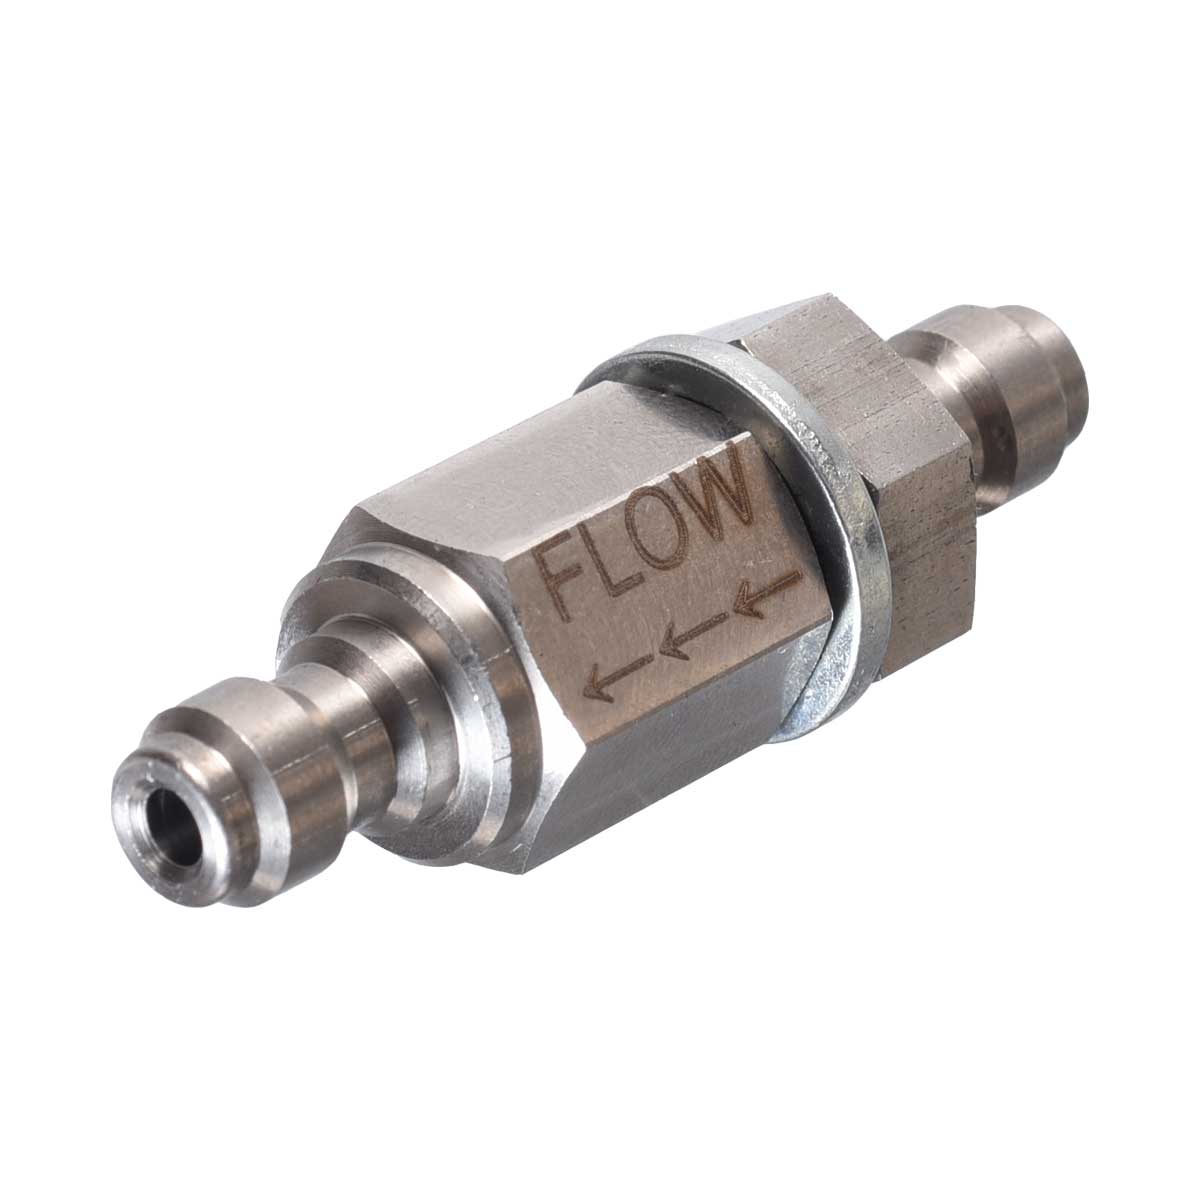 3 Way Connector 3 Way Connector Chrome Plated Pneumatic Component Carbon Steel G1/4in Thread Quick Coupler 